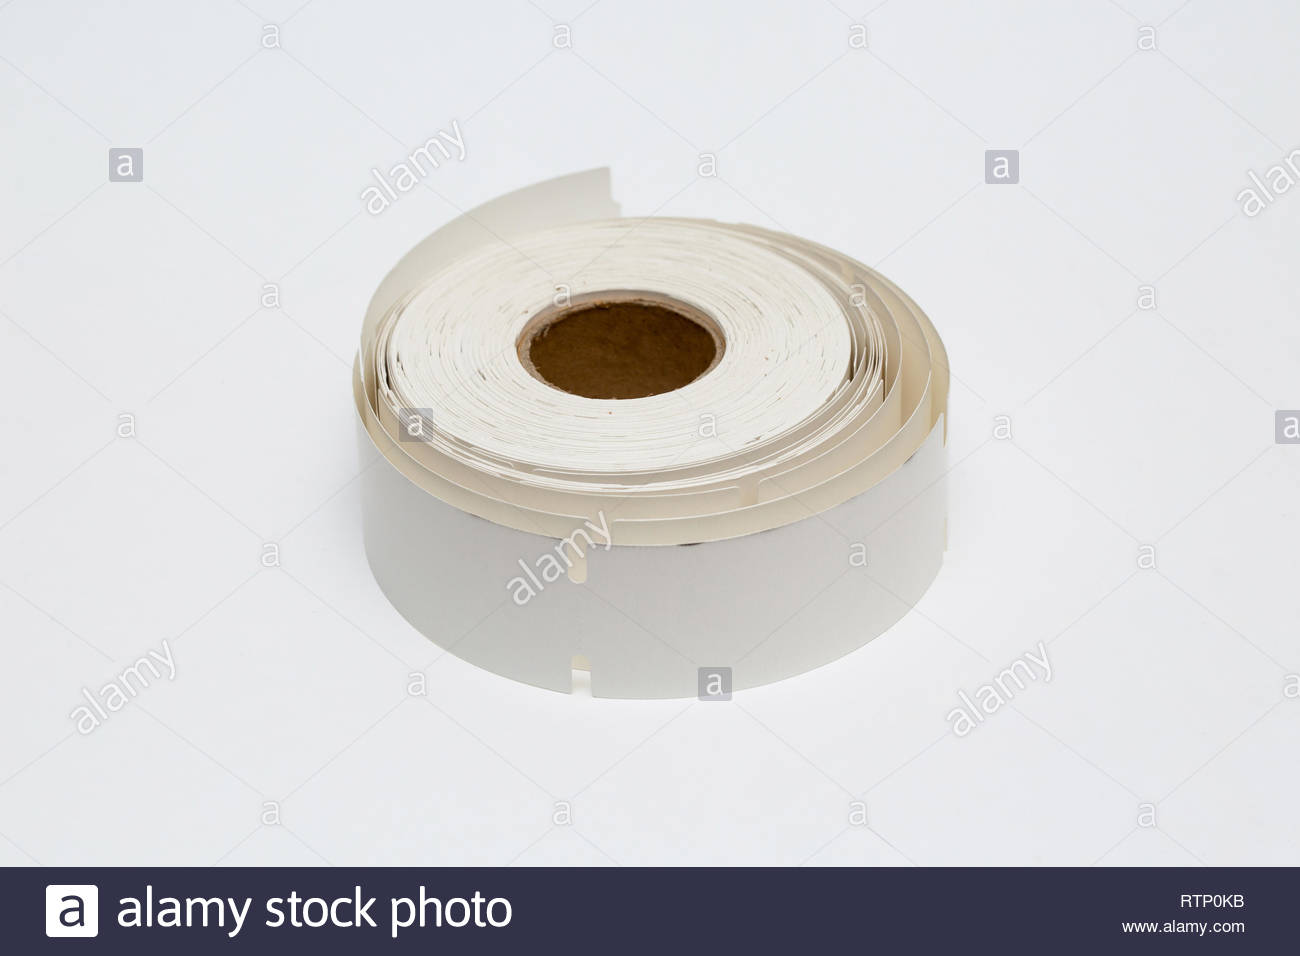 Roll Of Cash Register Tape Isolated On Soft Gray Background High